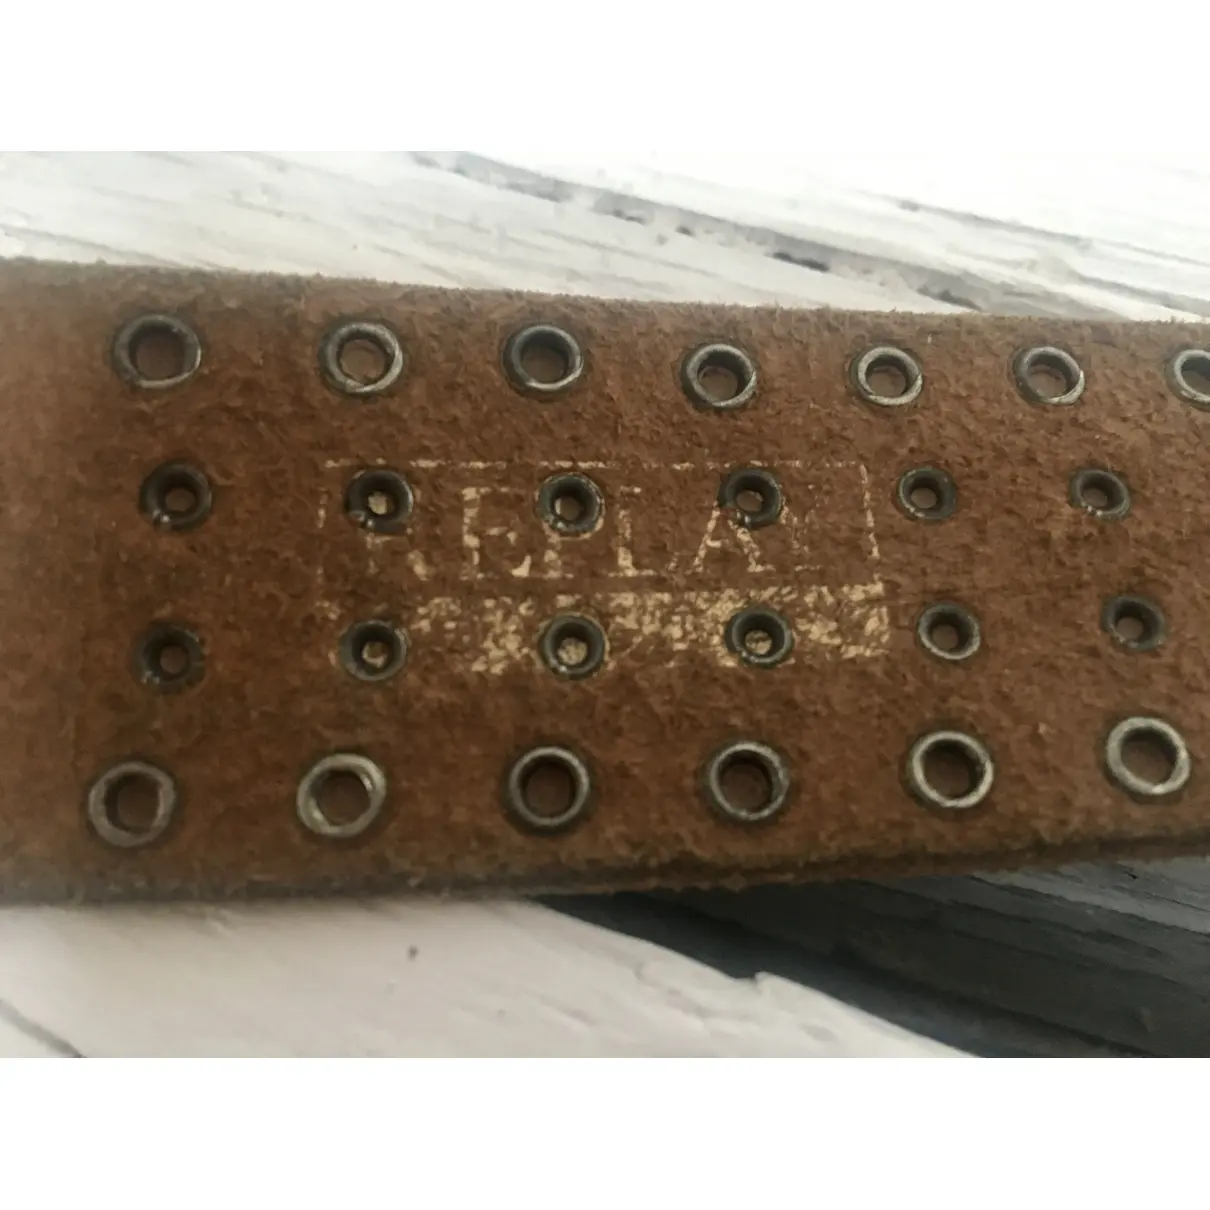 Replay Leather belt for sale - Vintage